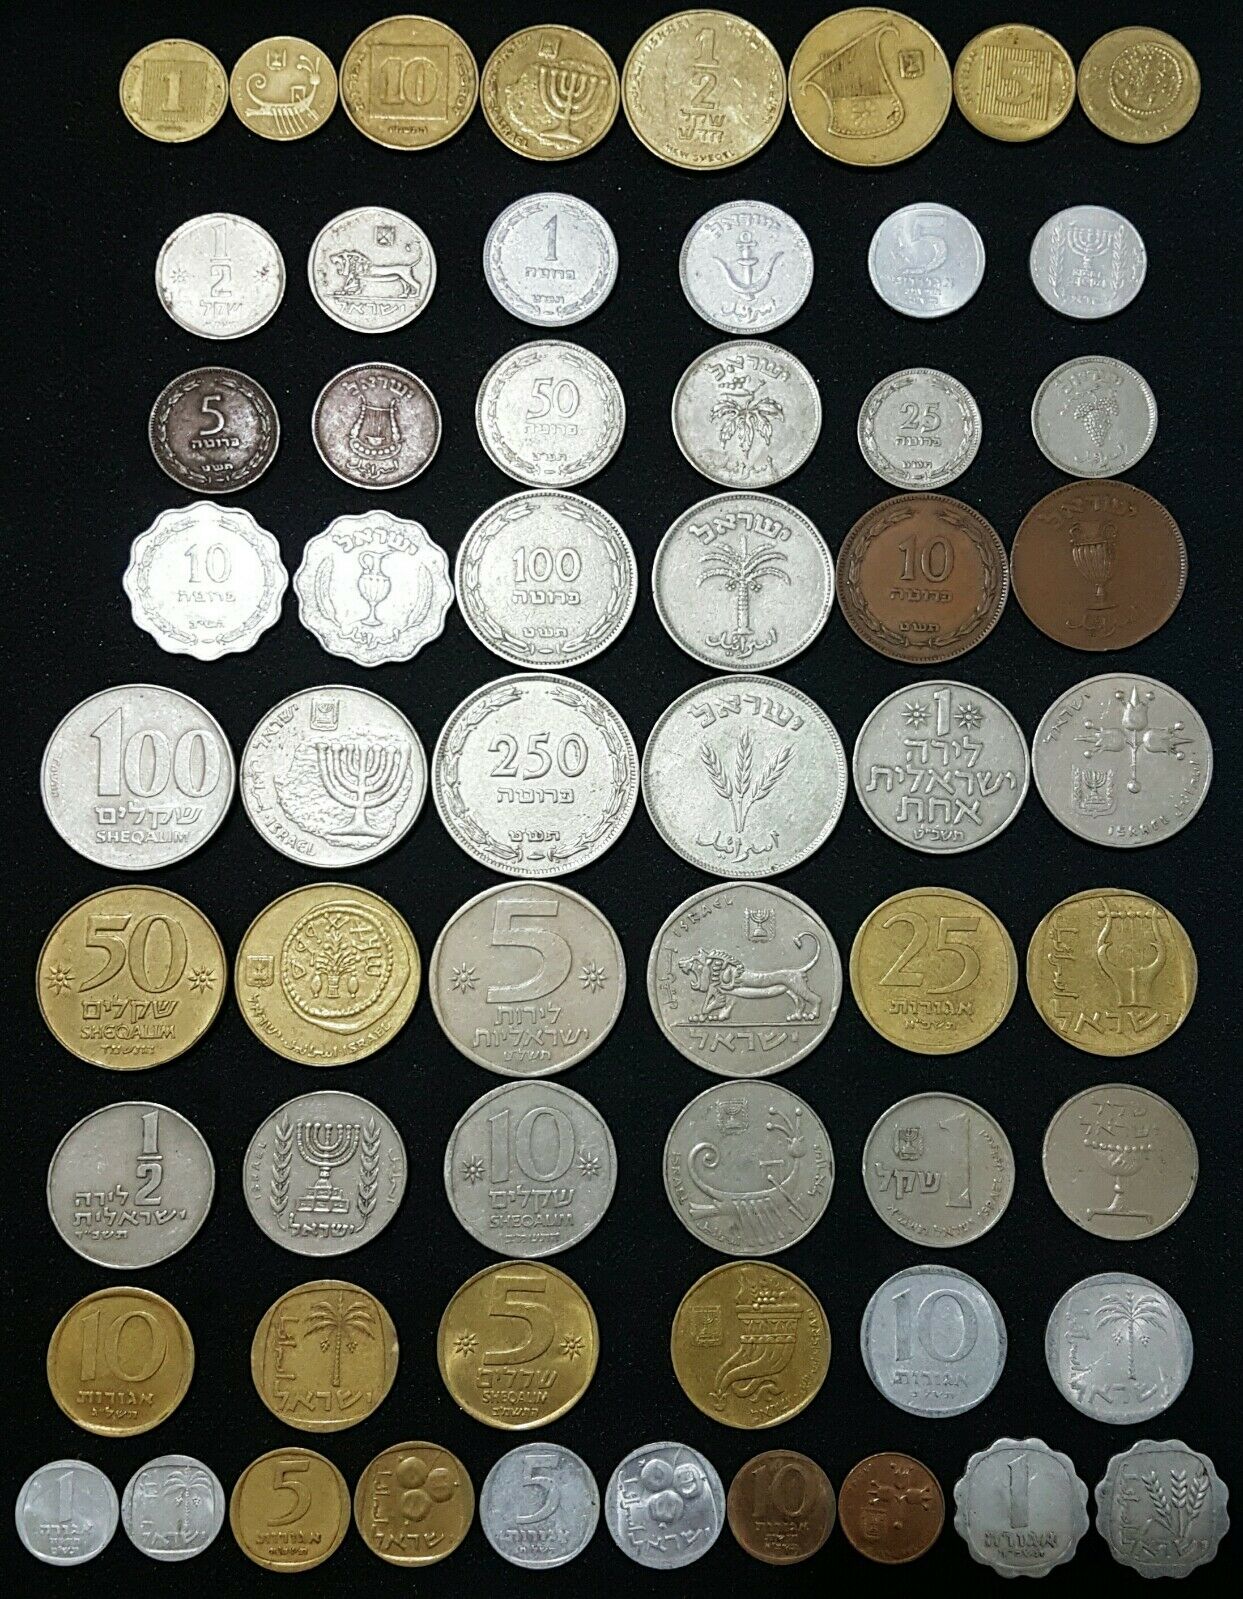 Israel Complete Set Coins Lot Of 30 Coin Pruta Israeli Sheqel Agorot Since 1949